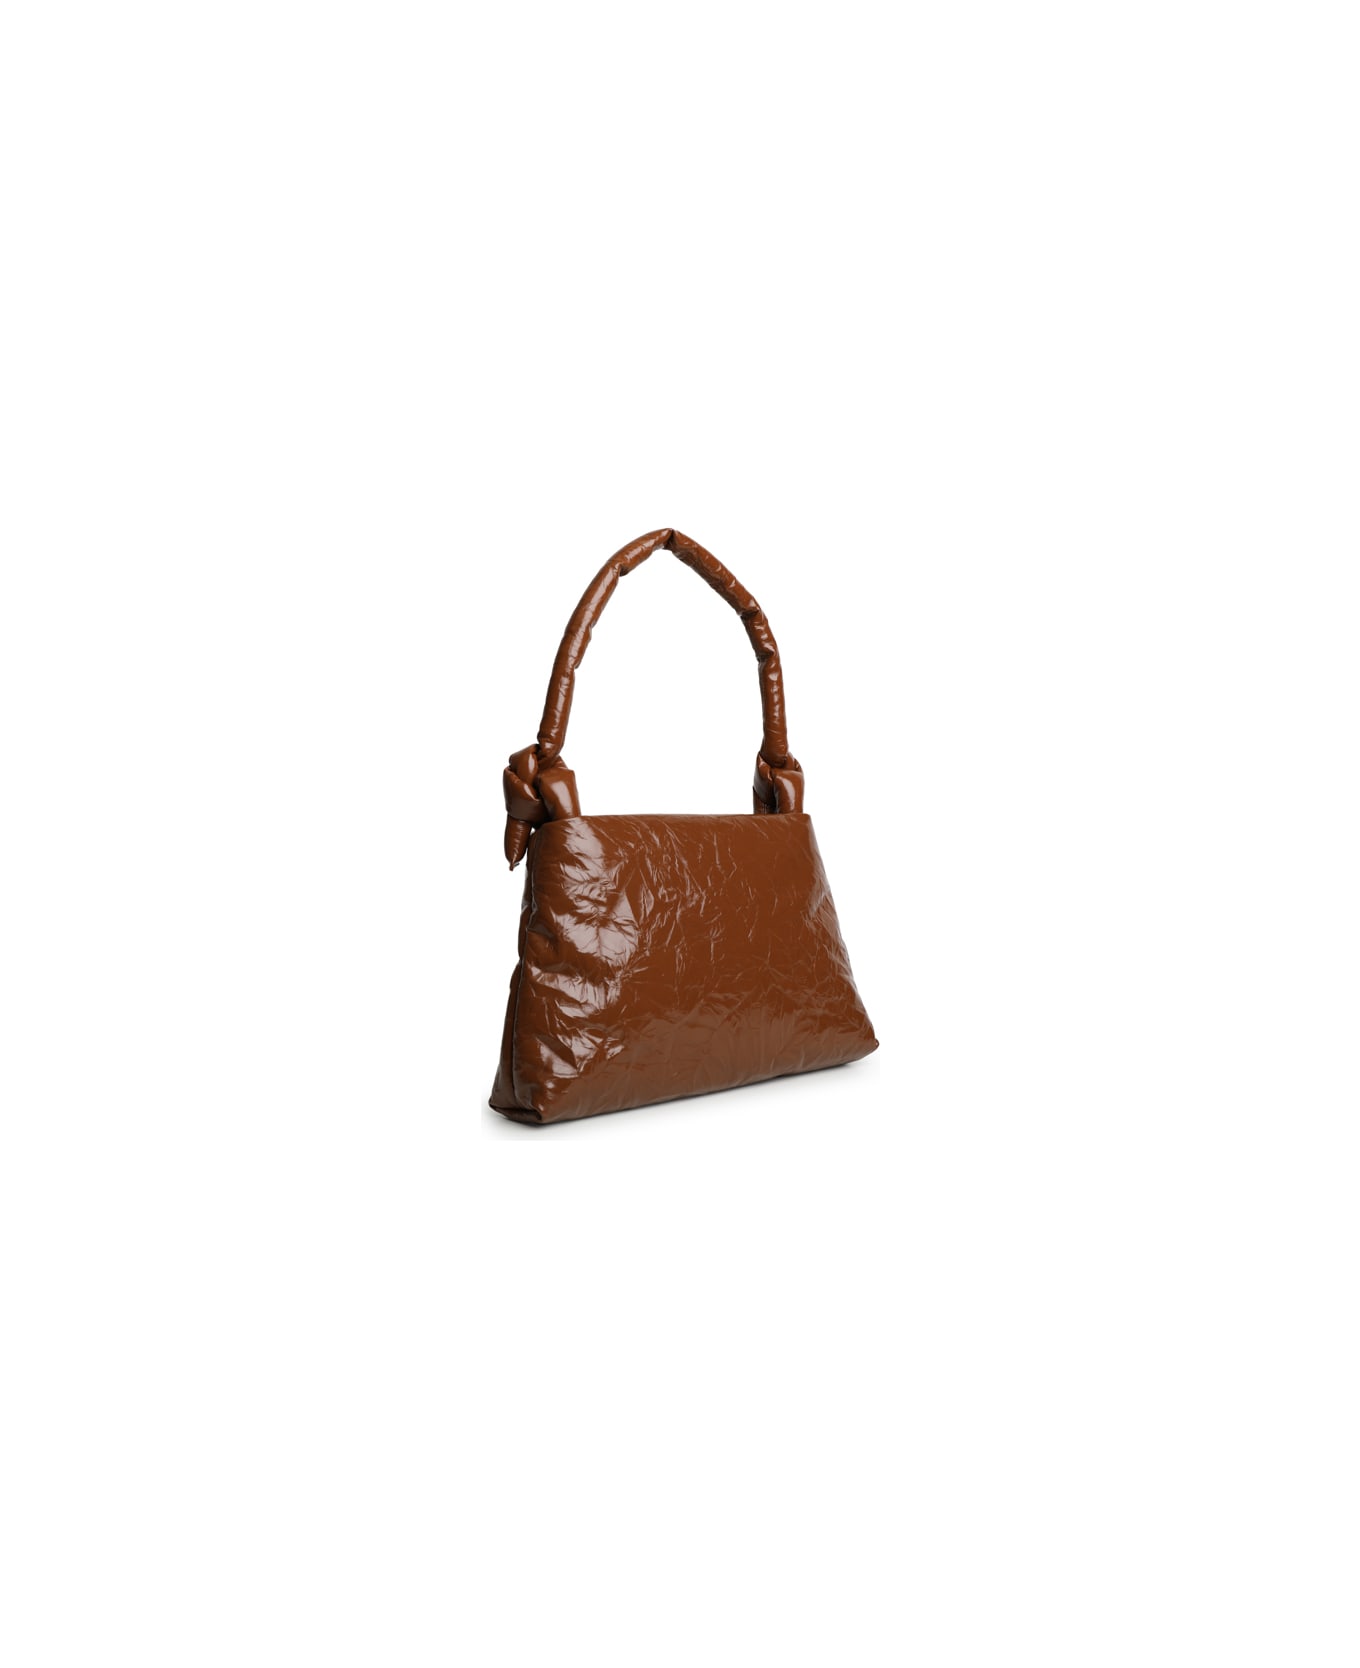 KASSL Editions Lady Bag With Side Knots - Cognac トートバッグ